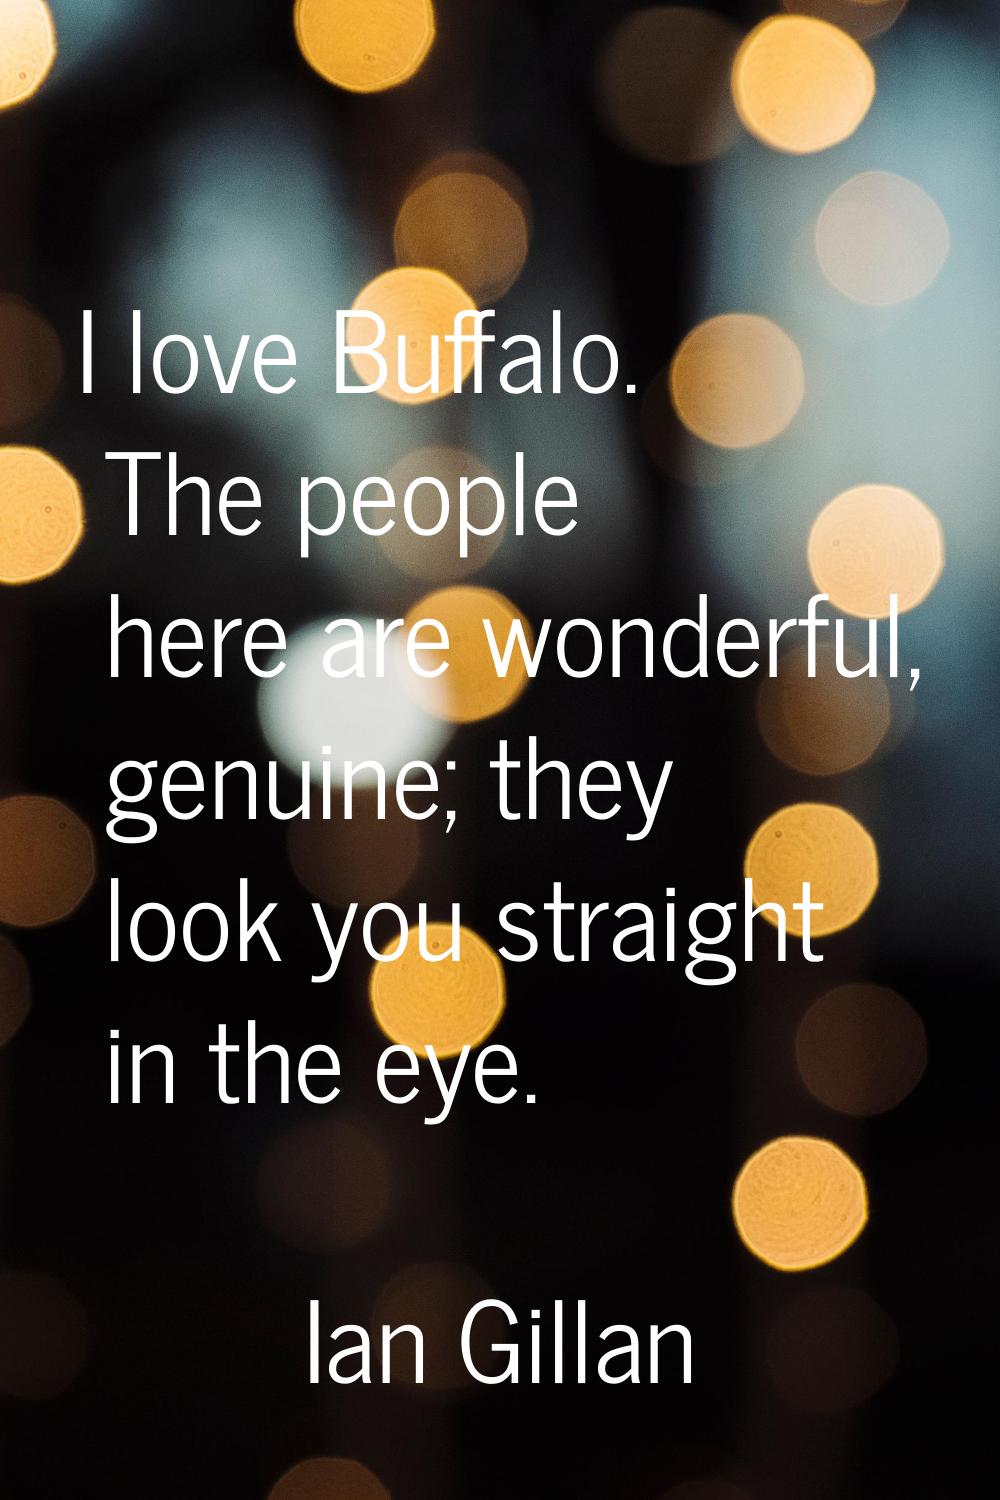 I love Buffalo. The people here are wonderful, genuine; they look you straight in the eye.